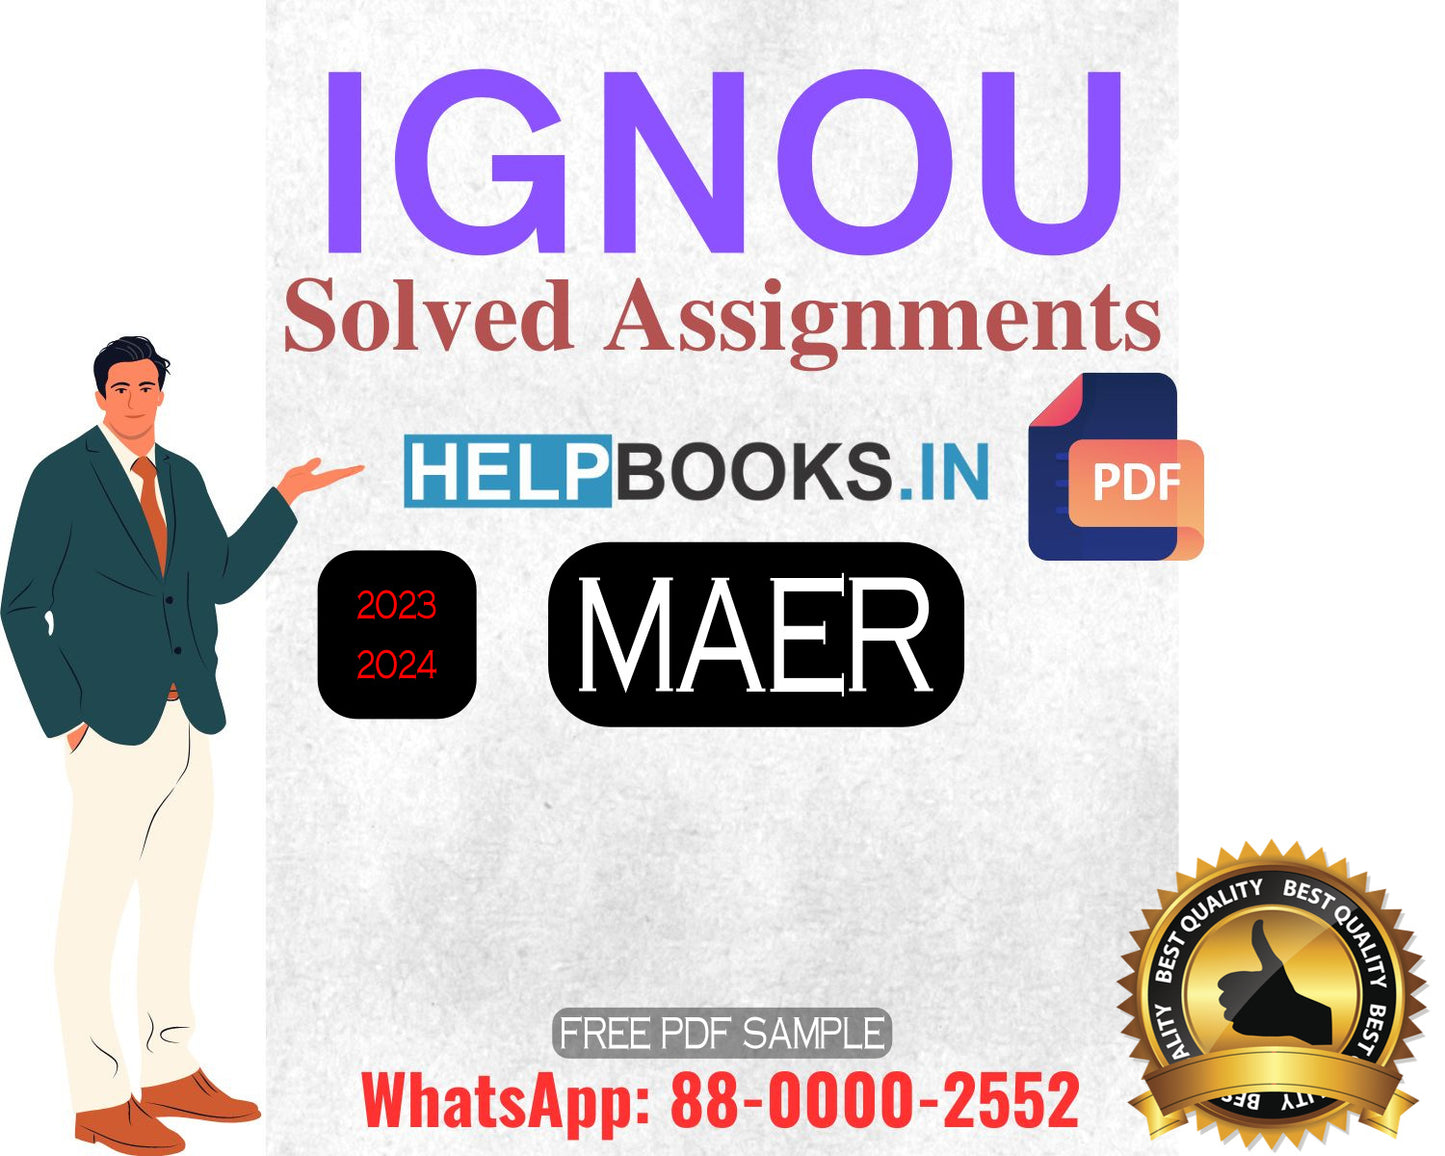 IGNOU Master's Degree Programme Latest IGNOU Solved Assignment 2023-24 : MAER MASTER OF ARTS ENTREPRENEURSHIP Solved Assignments